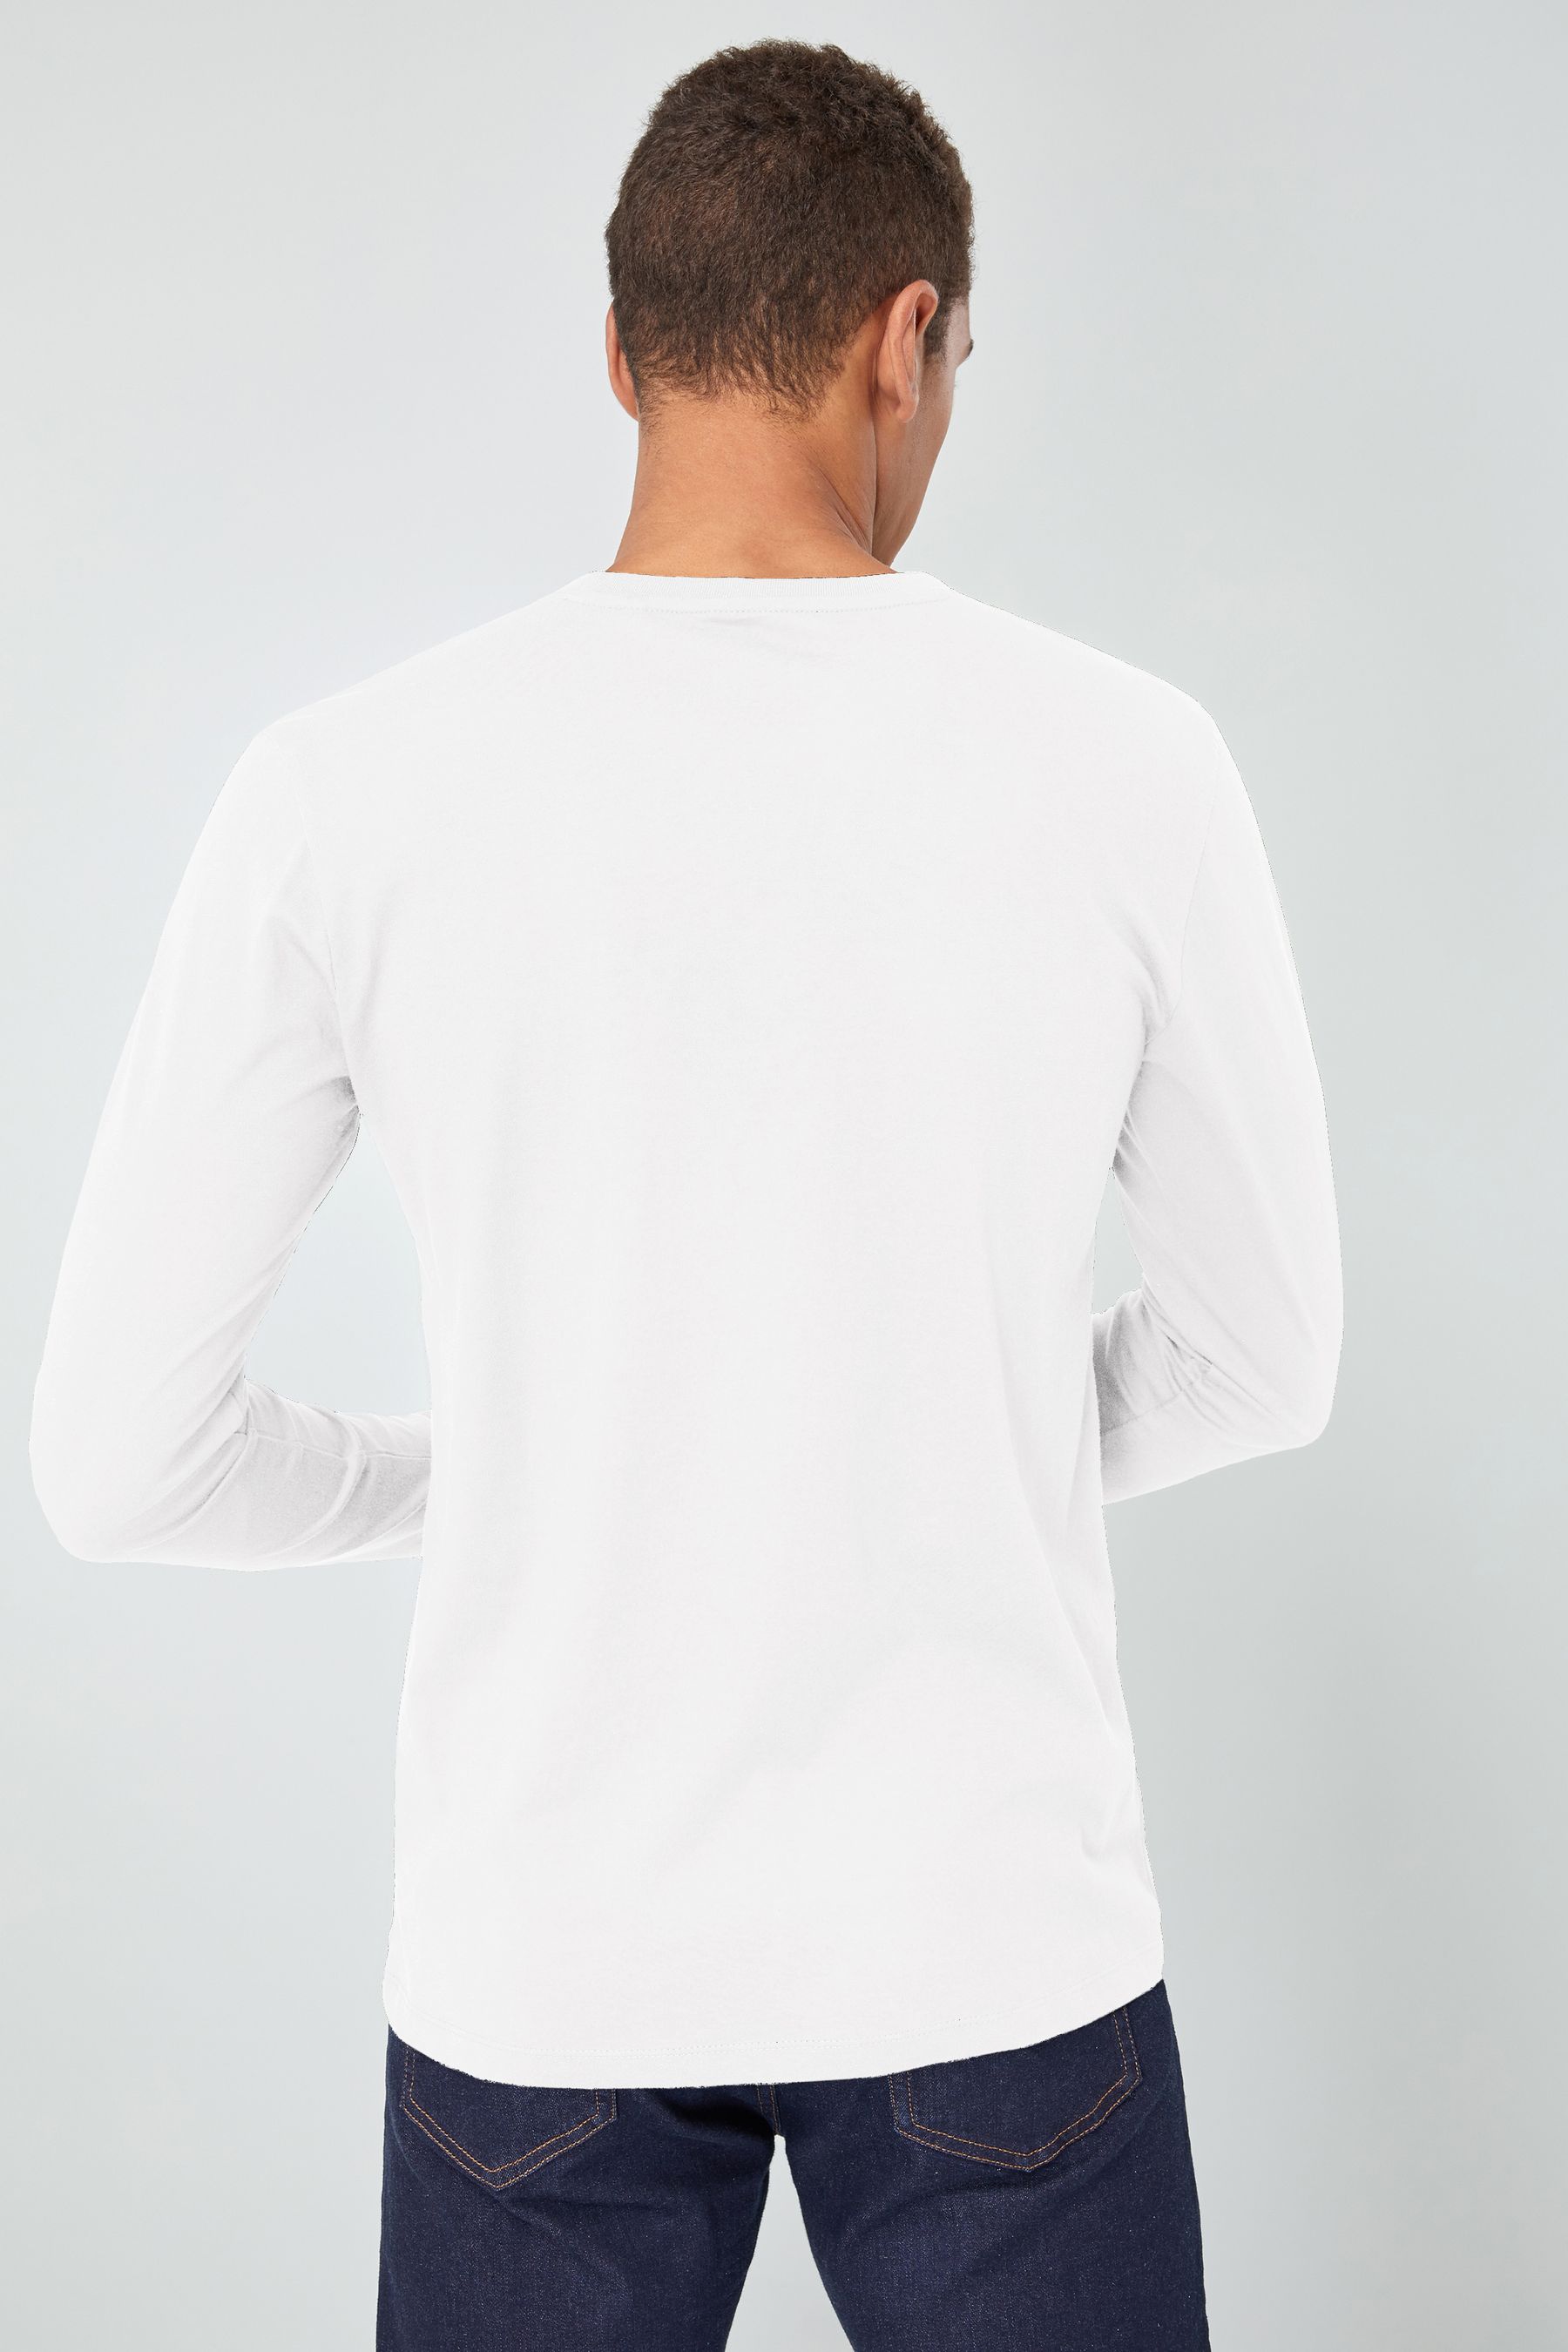 Buy White Regular Fit Long Sleeve Crew Neck T-Shirt from the Next UK ...